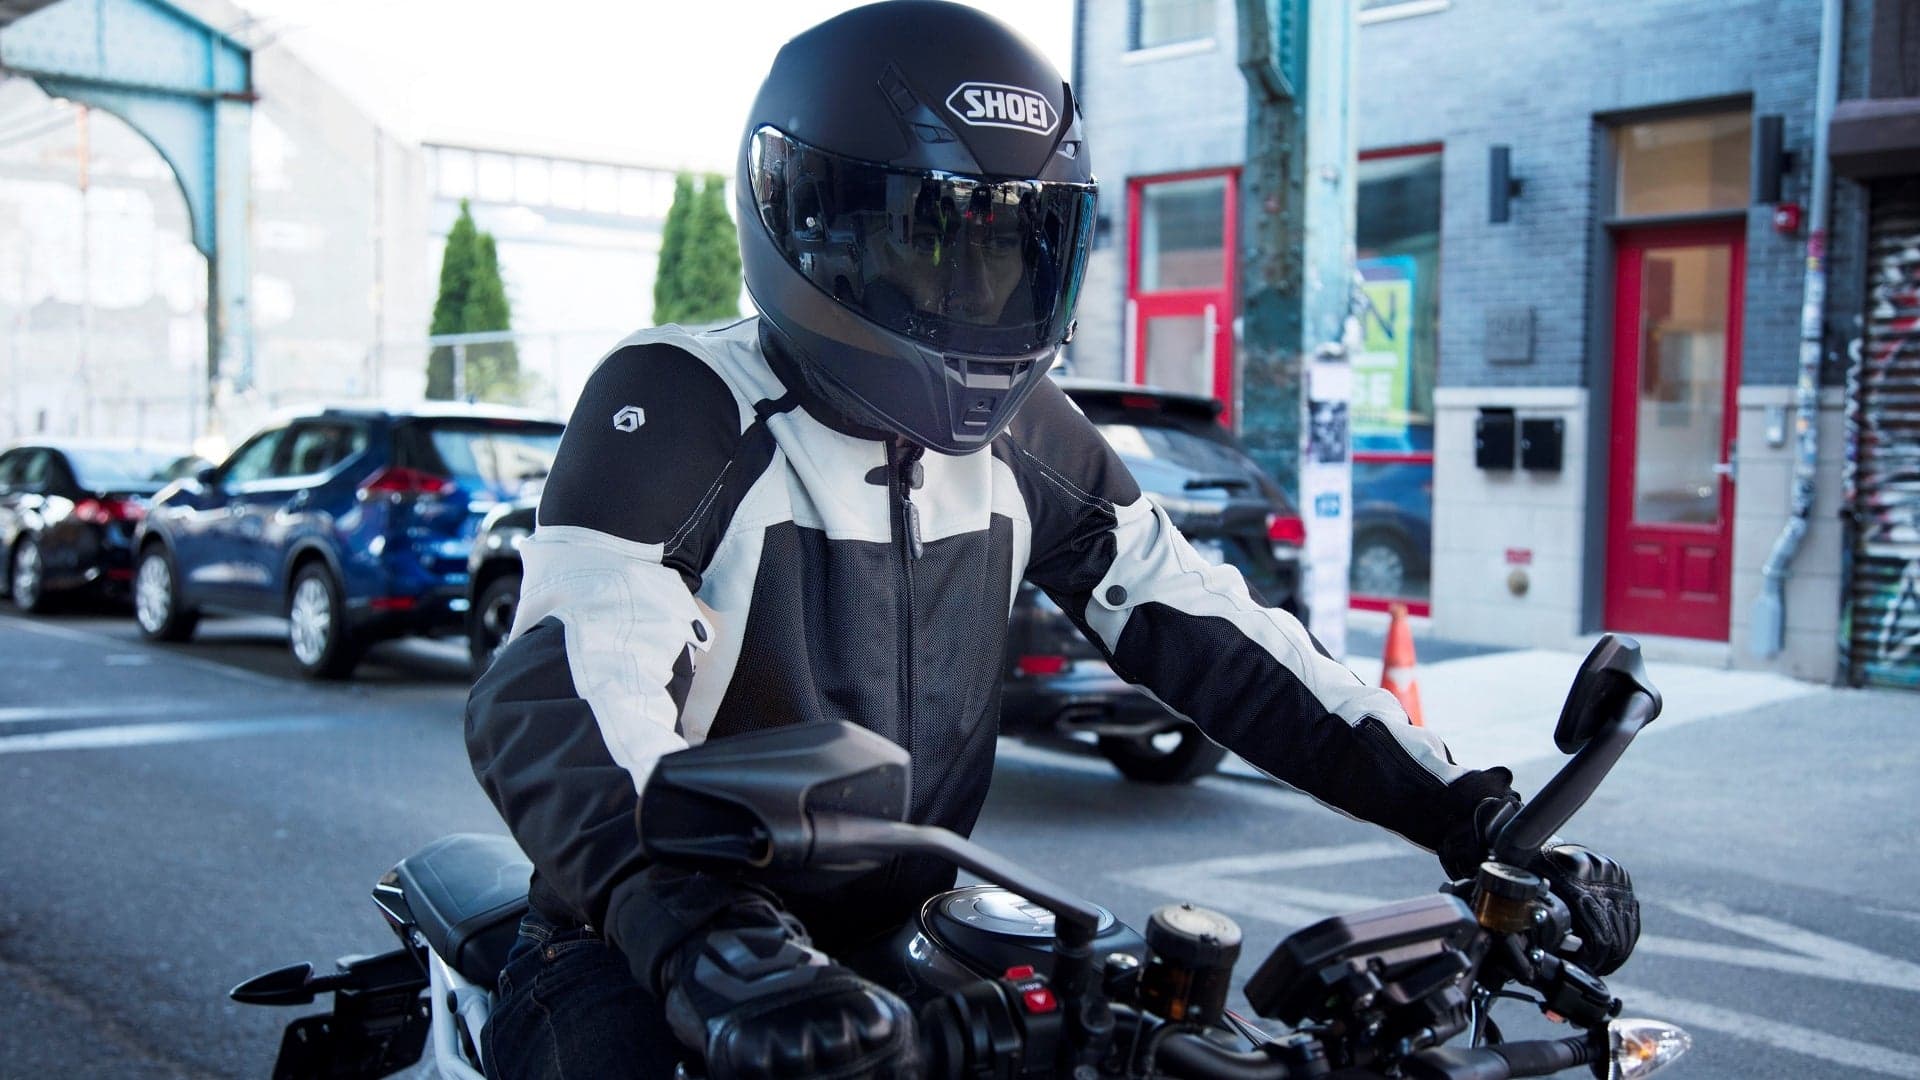 Gear Review: The Reax Alta Motorcycle Jacket Lets You Ride in Armored Style